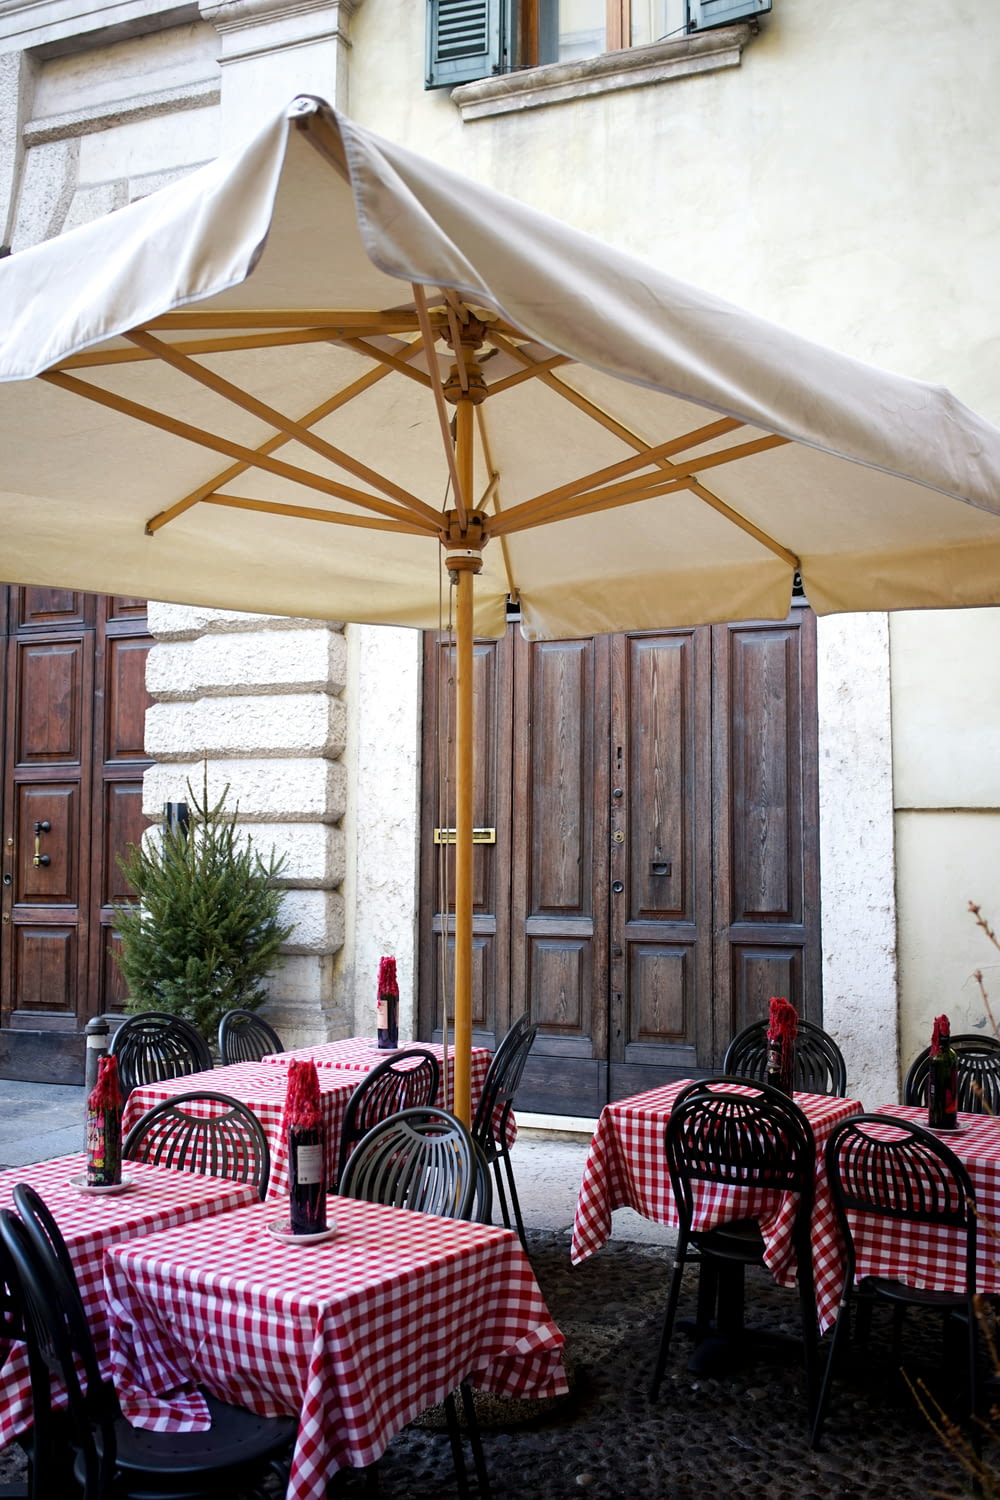 a table with a red and white checkered tablecloth under an umbrella